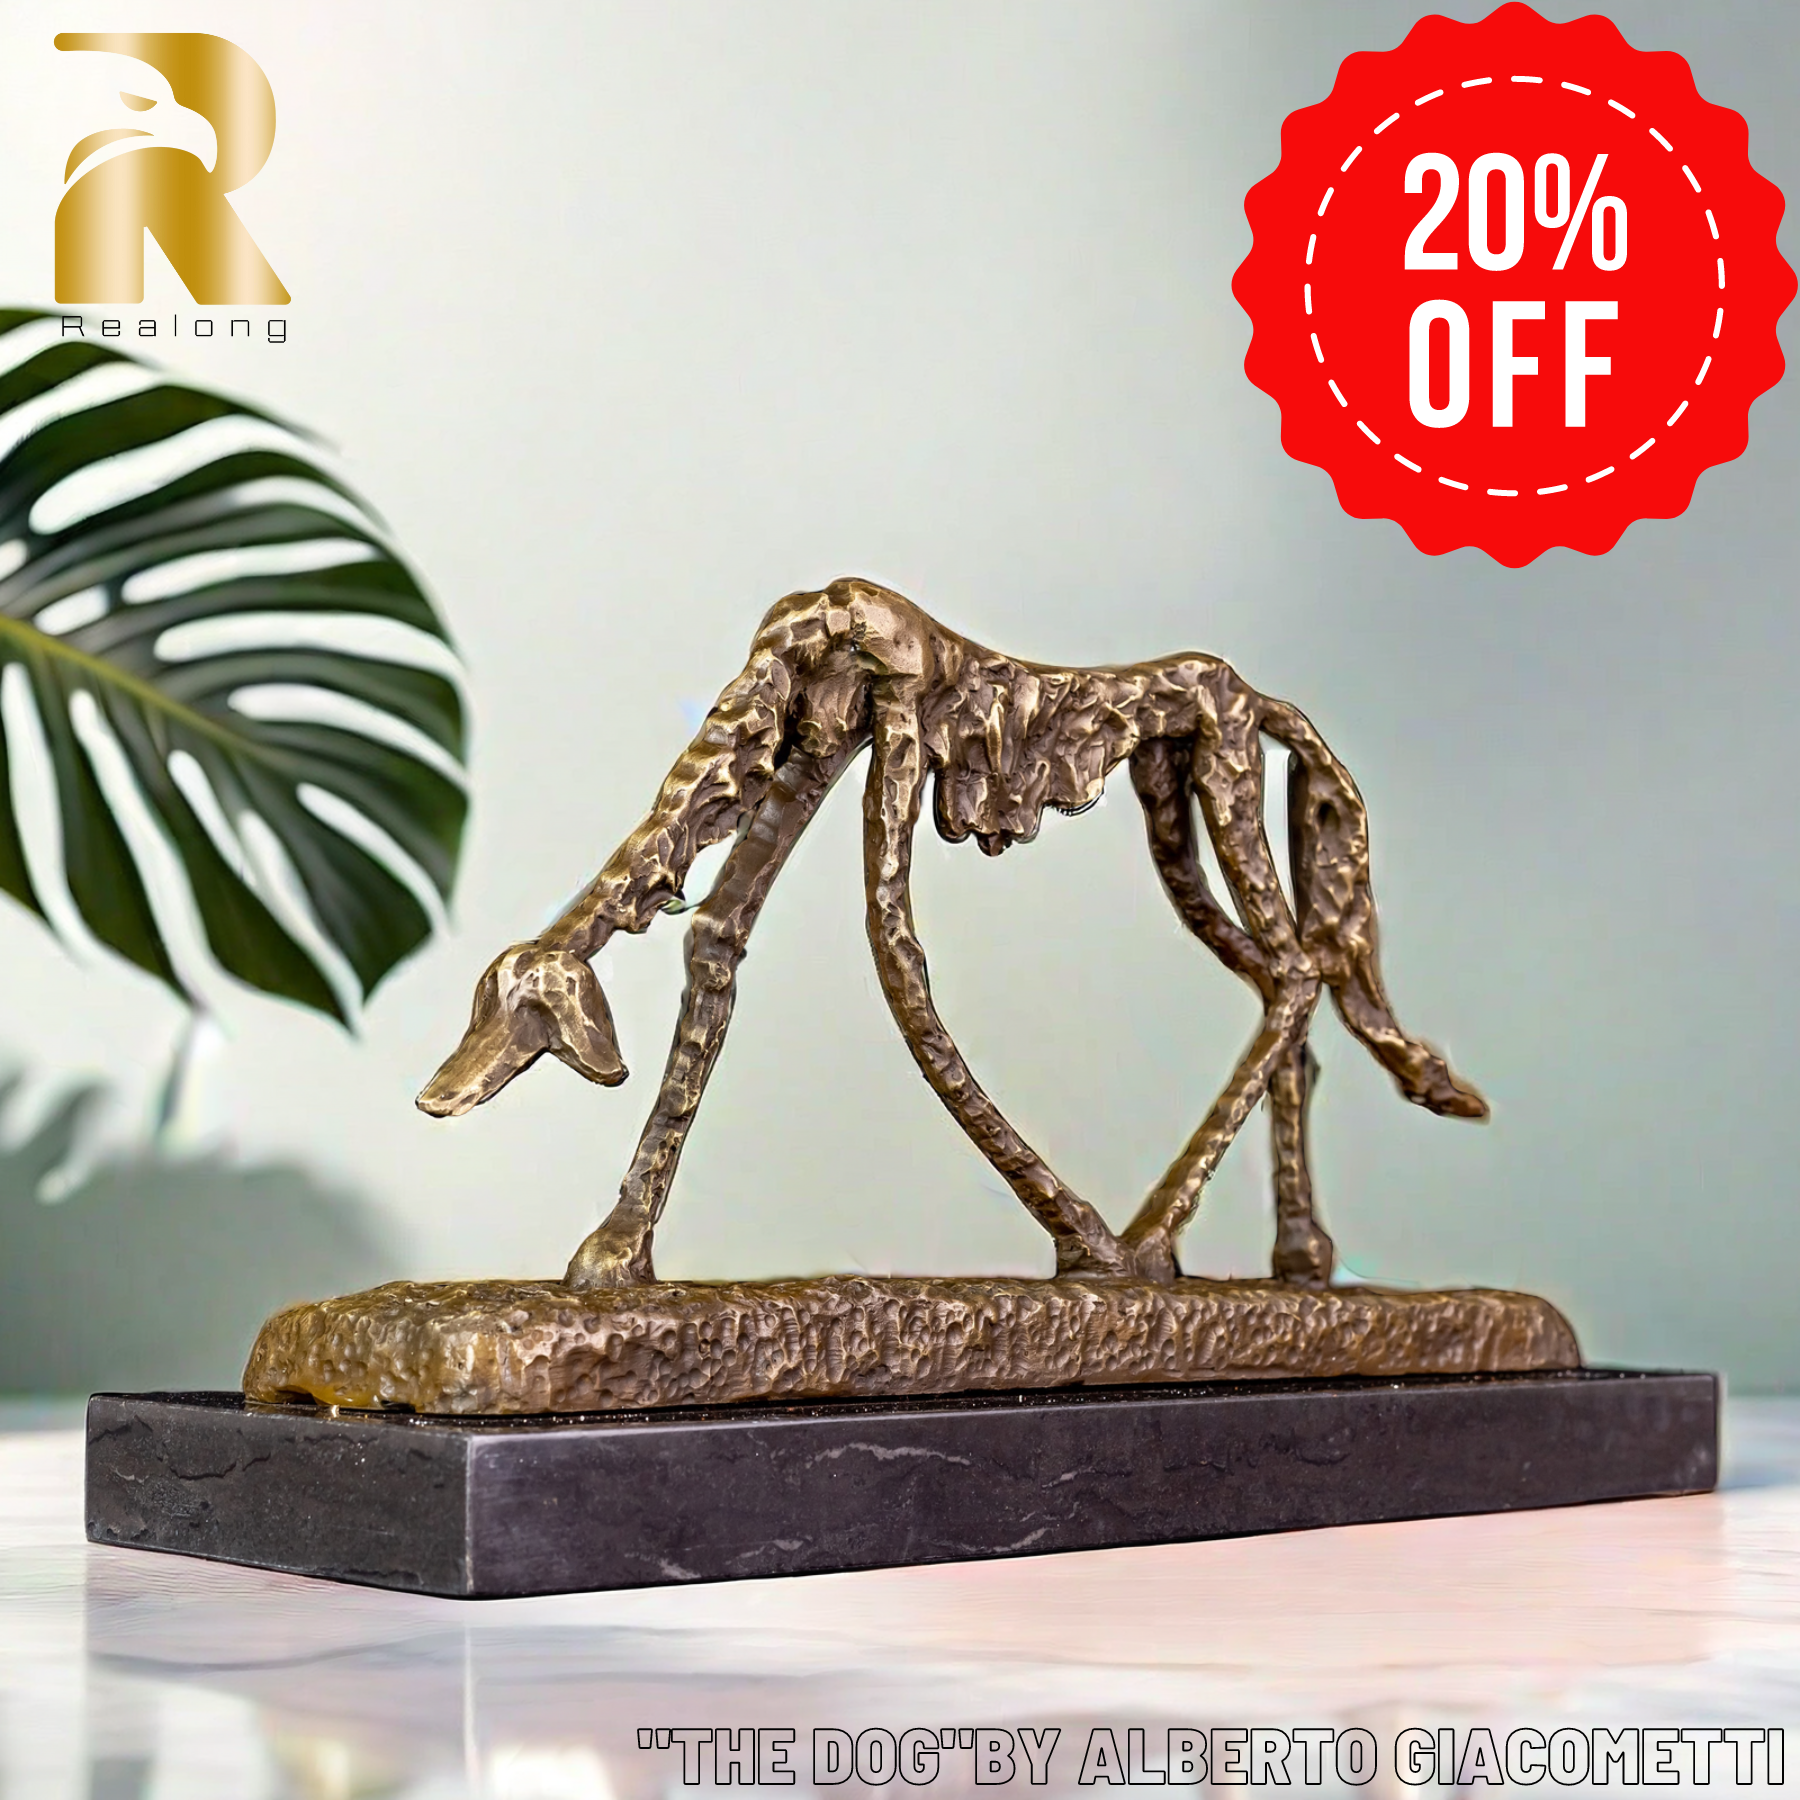 "The Dog" Bronze Sculpture Replica by Alberto Giacometti - Famous Abstract Bronze Animal Sculpture-Iconic Modern Art Statue for Home Decor and Collectors